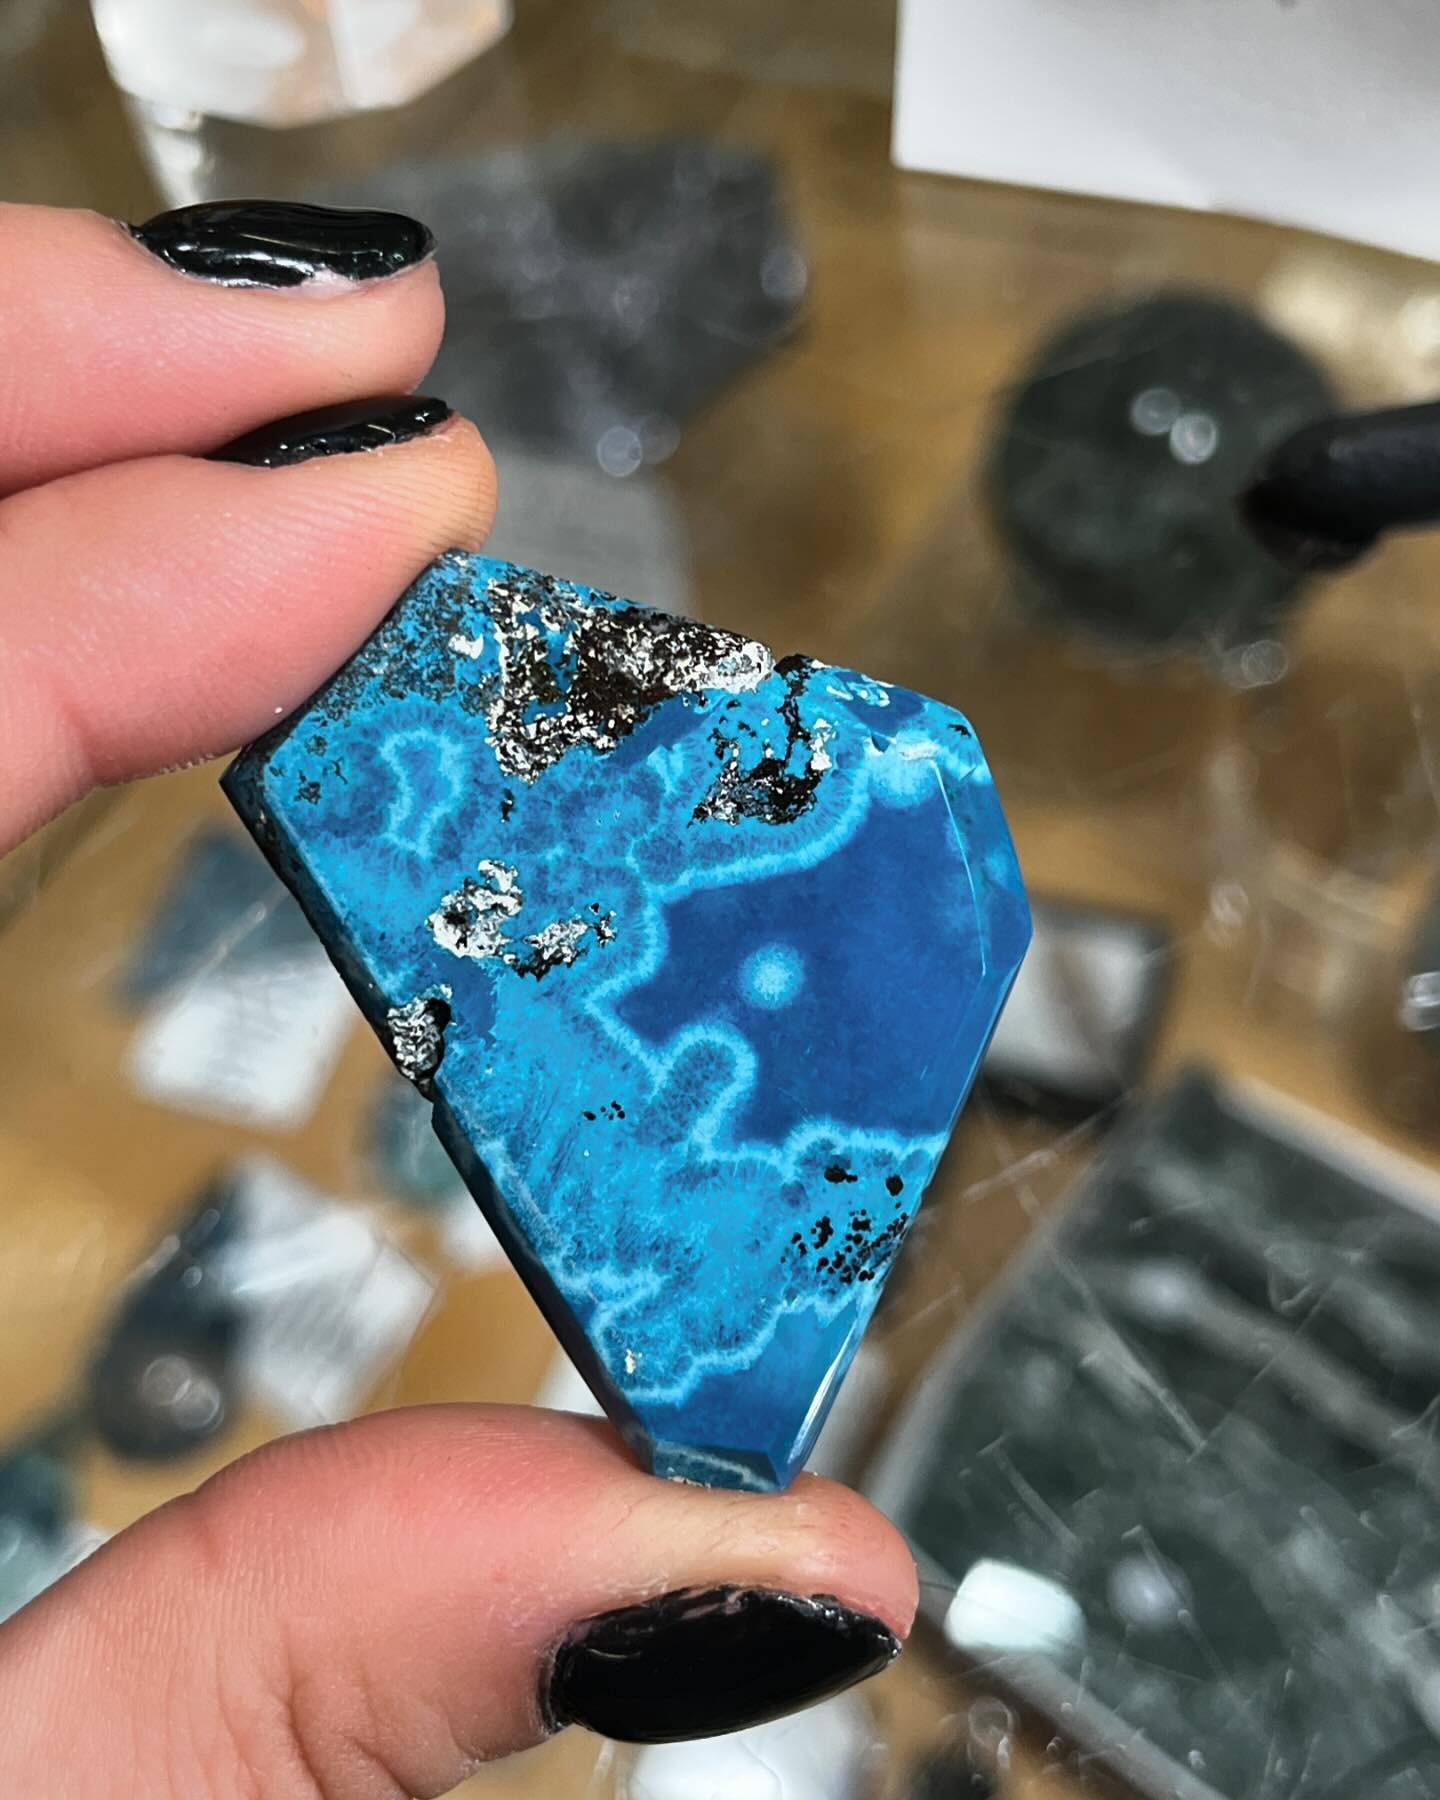 Quantum Quattro slice. 🩵🌀💙This one in particular has a heavy resemblance in pattern to shattuckite